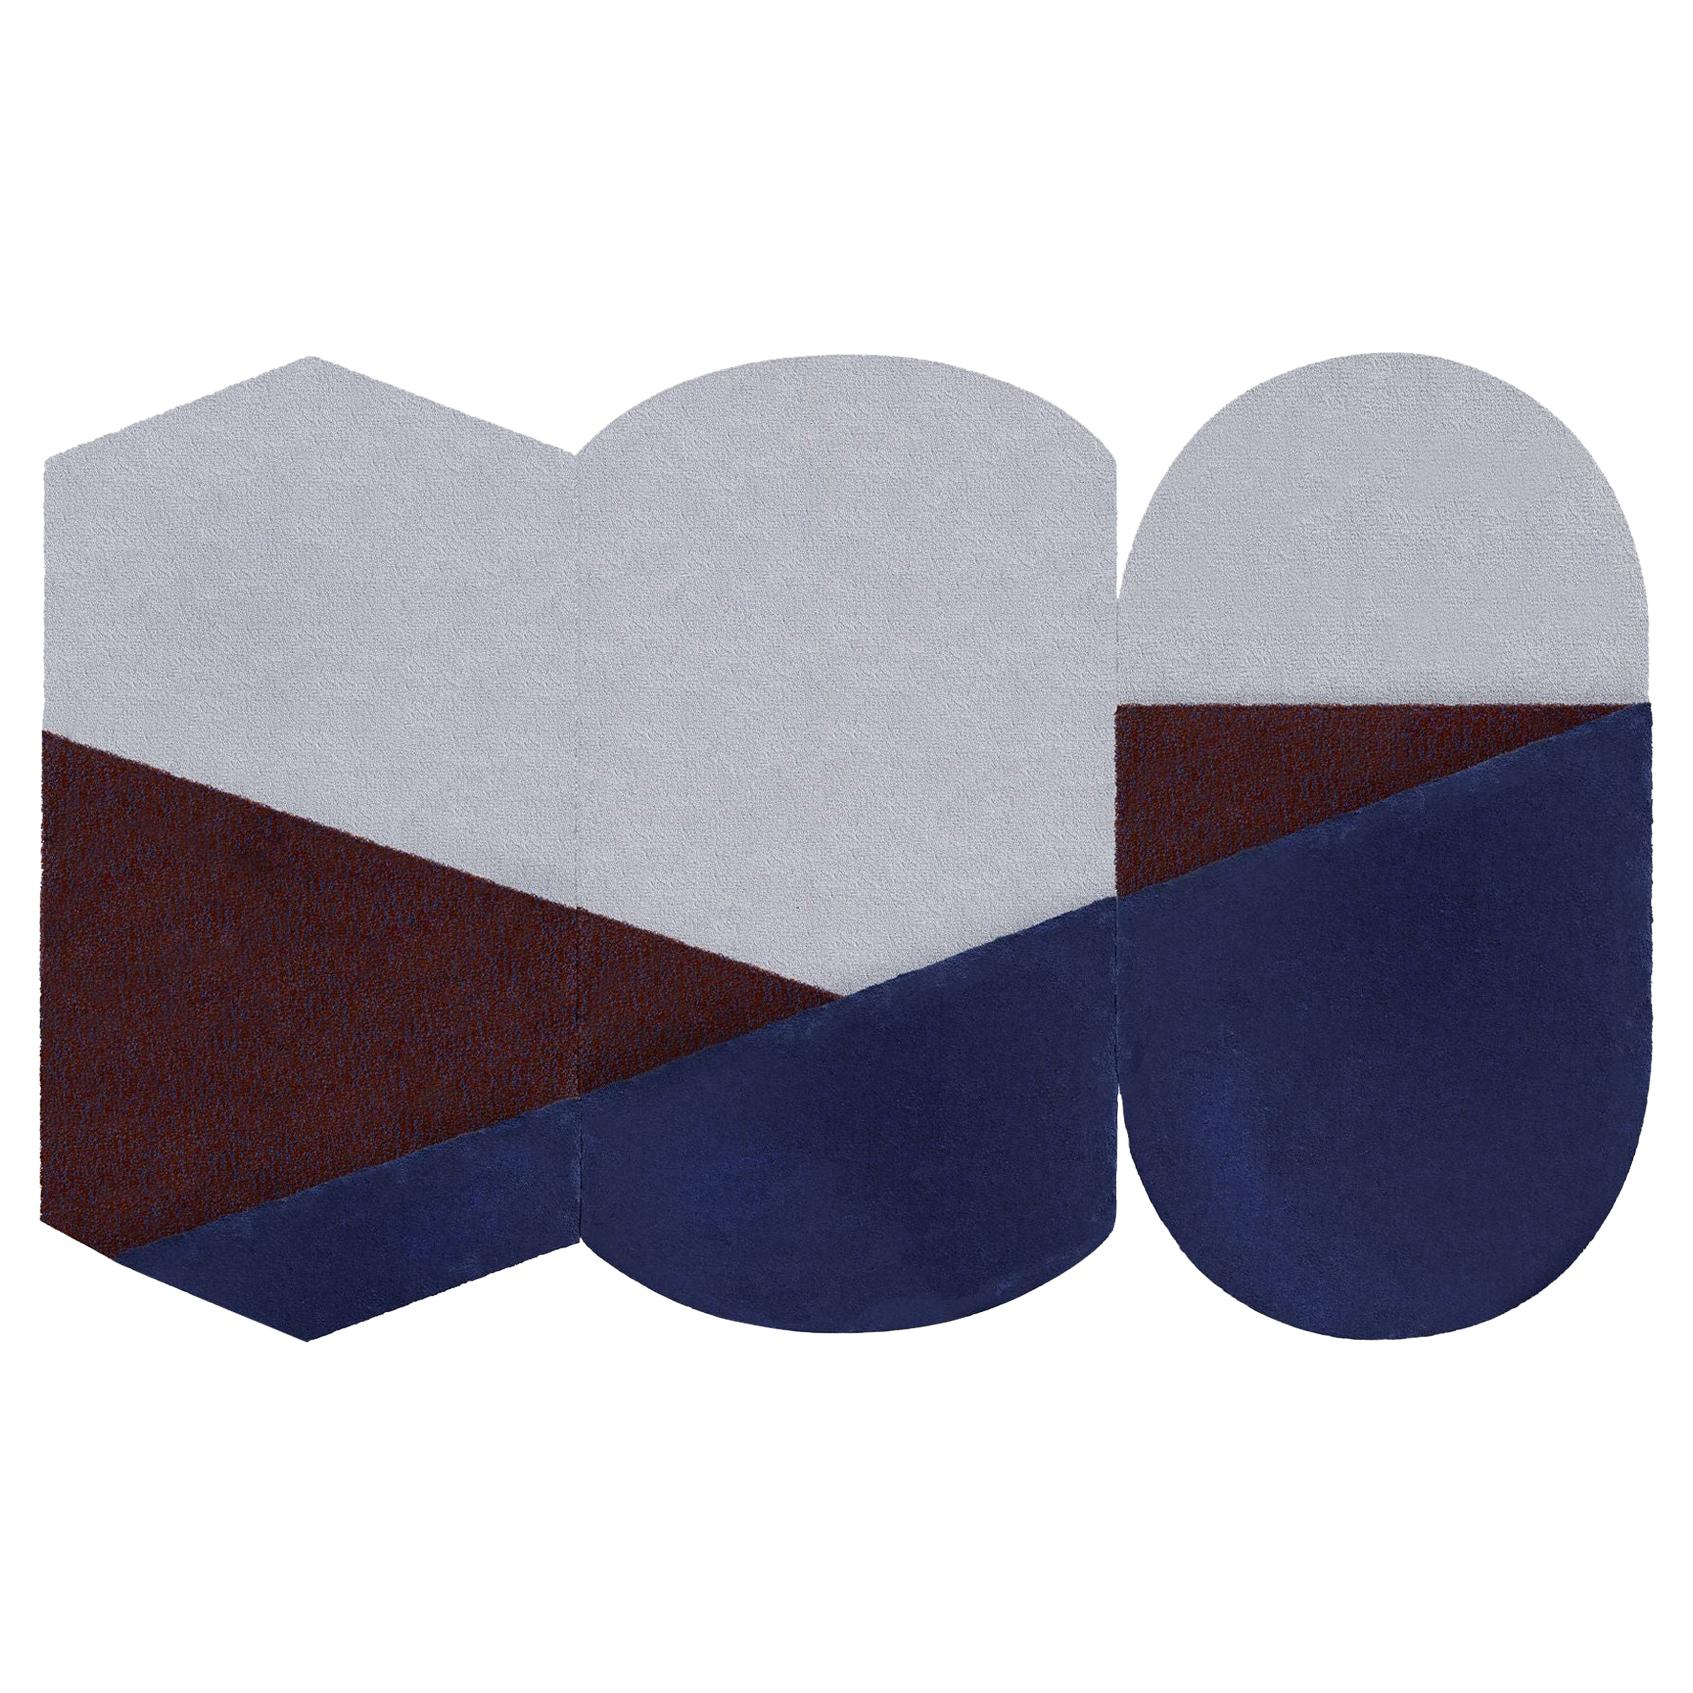 Oci Triptych M, Composition of 3 Rugs 100% Wool /Blue and Brick by Portego